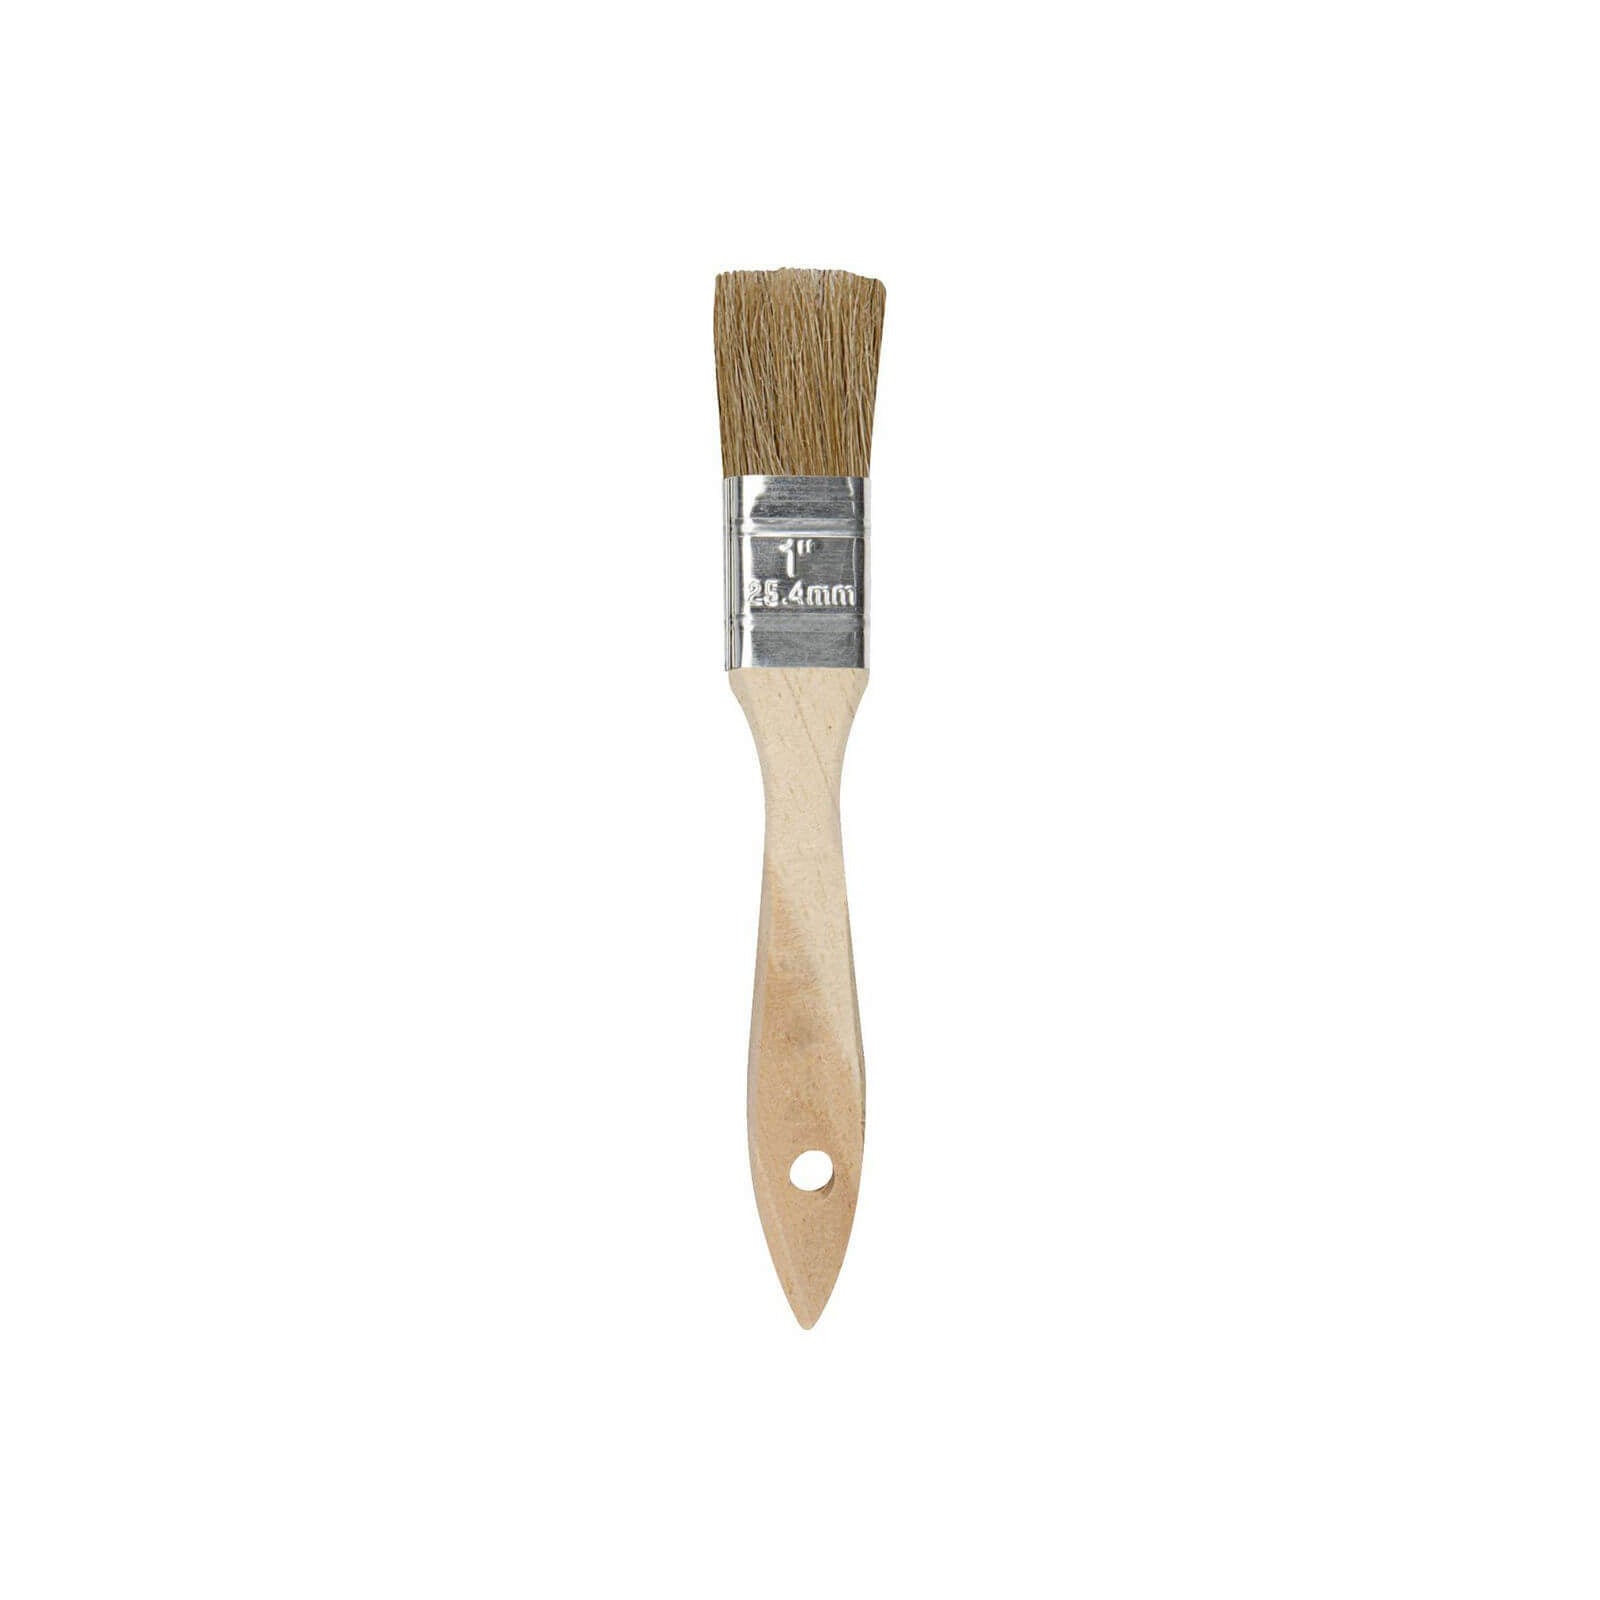 Chip Brushes - Rossi Paint Stores - Single Thick - 1"